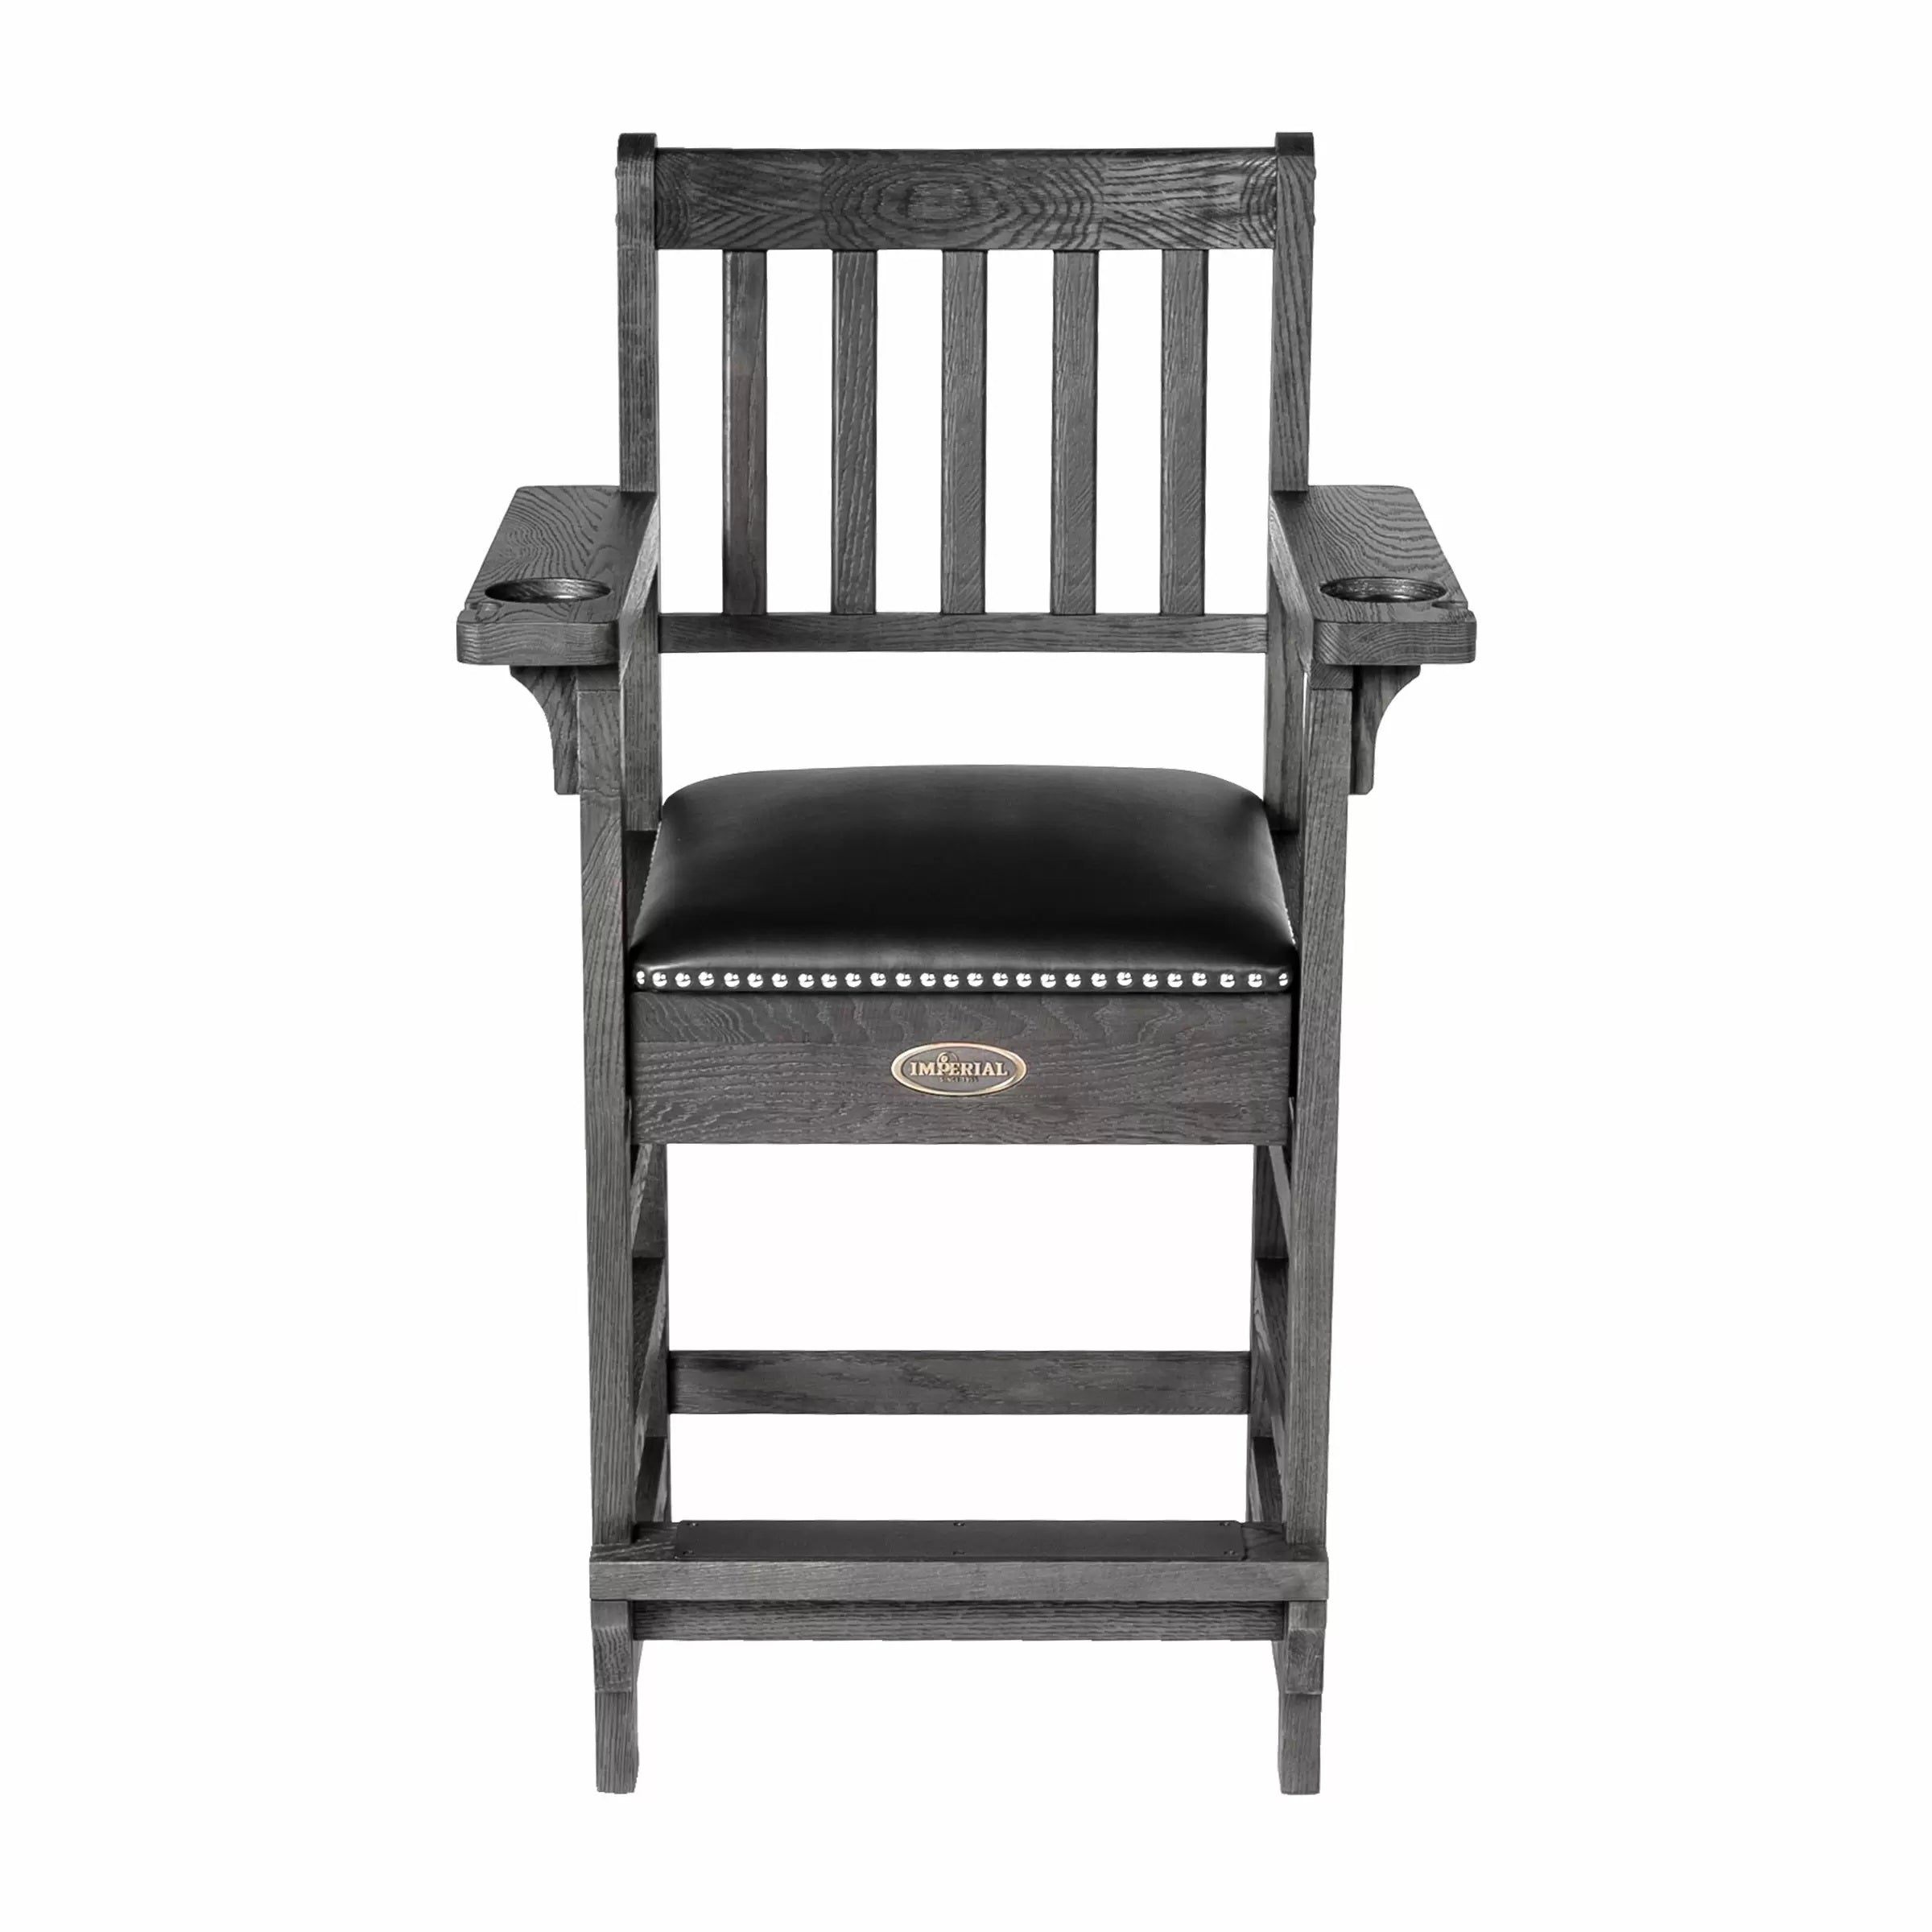 Imperial USA Premium Spectator Chair with Drawer Silver Mist